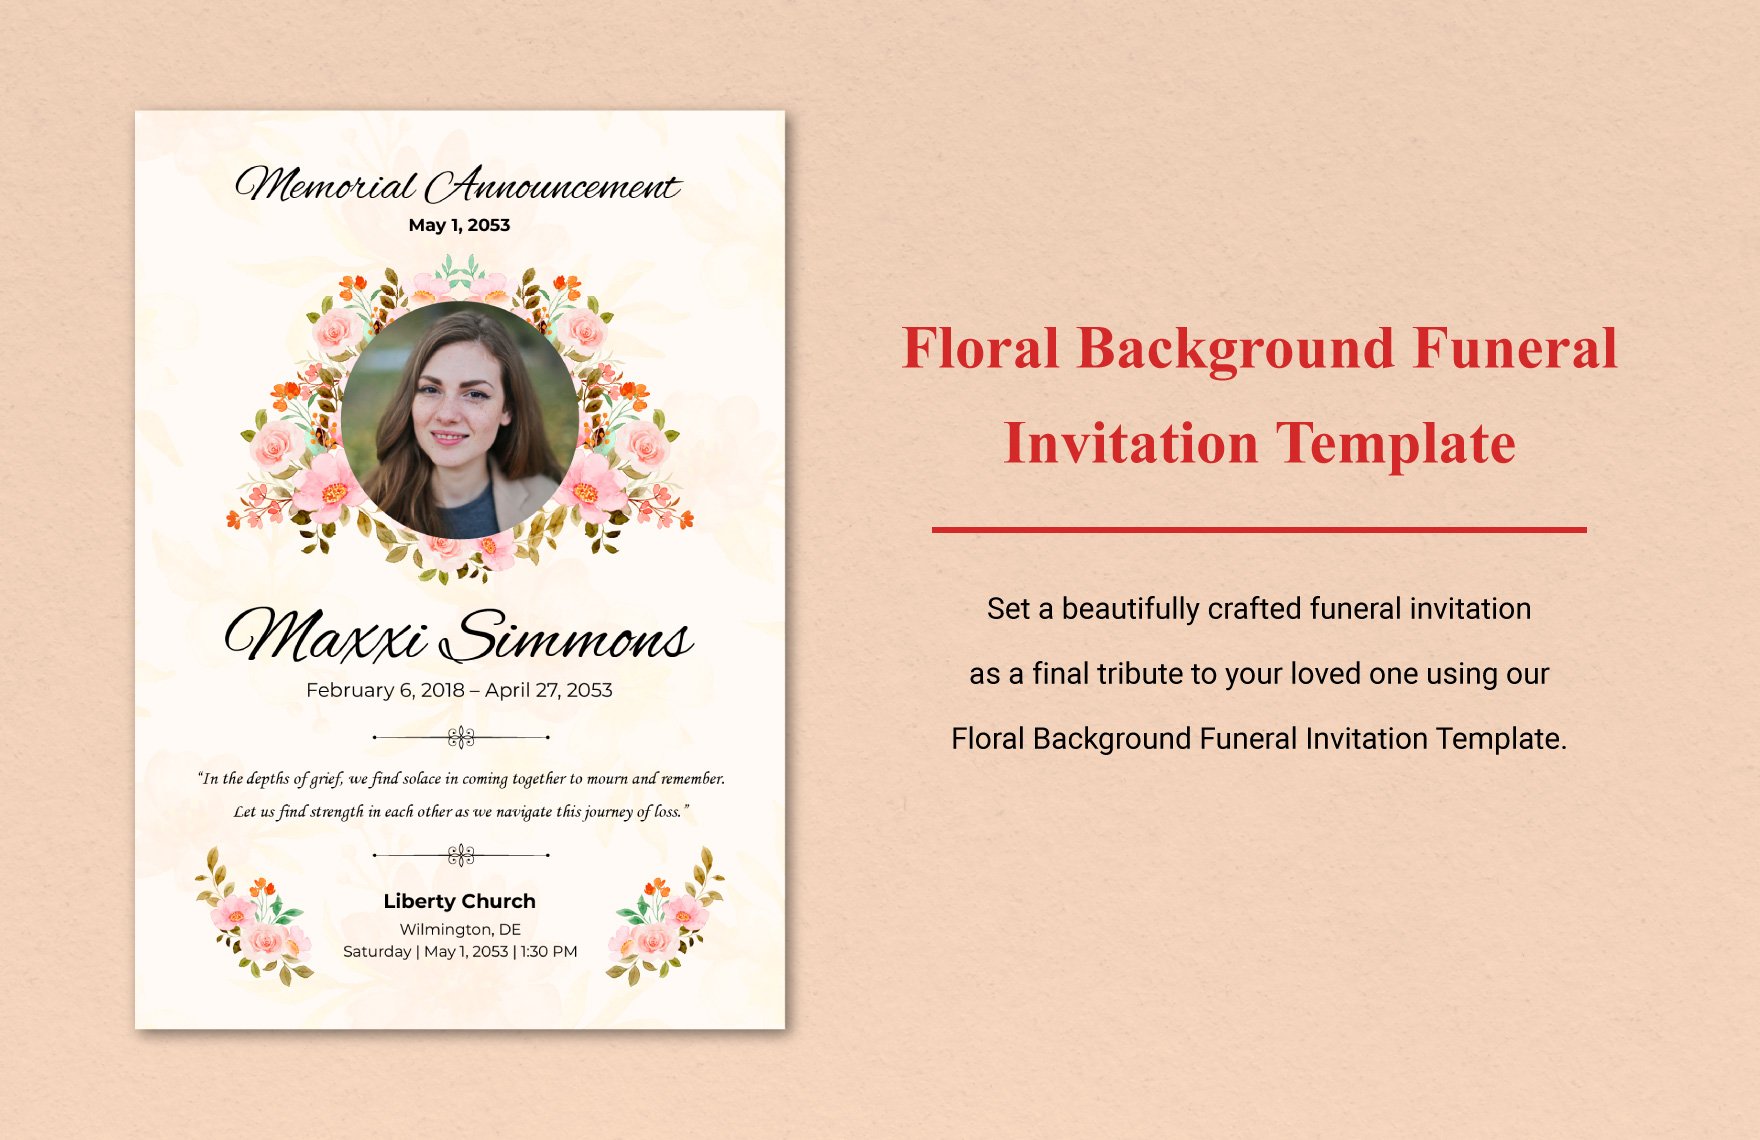 floral-background-funeral-invitation